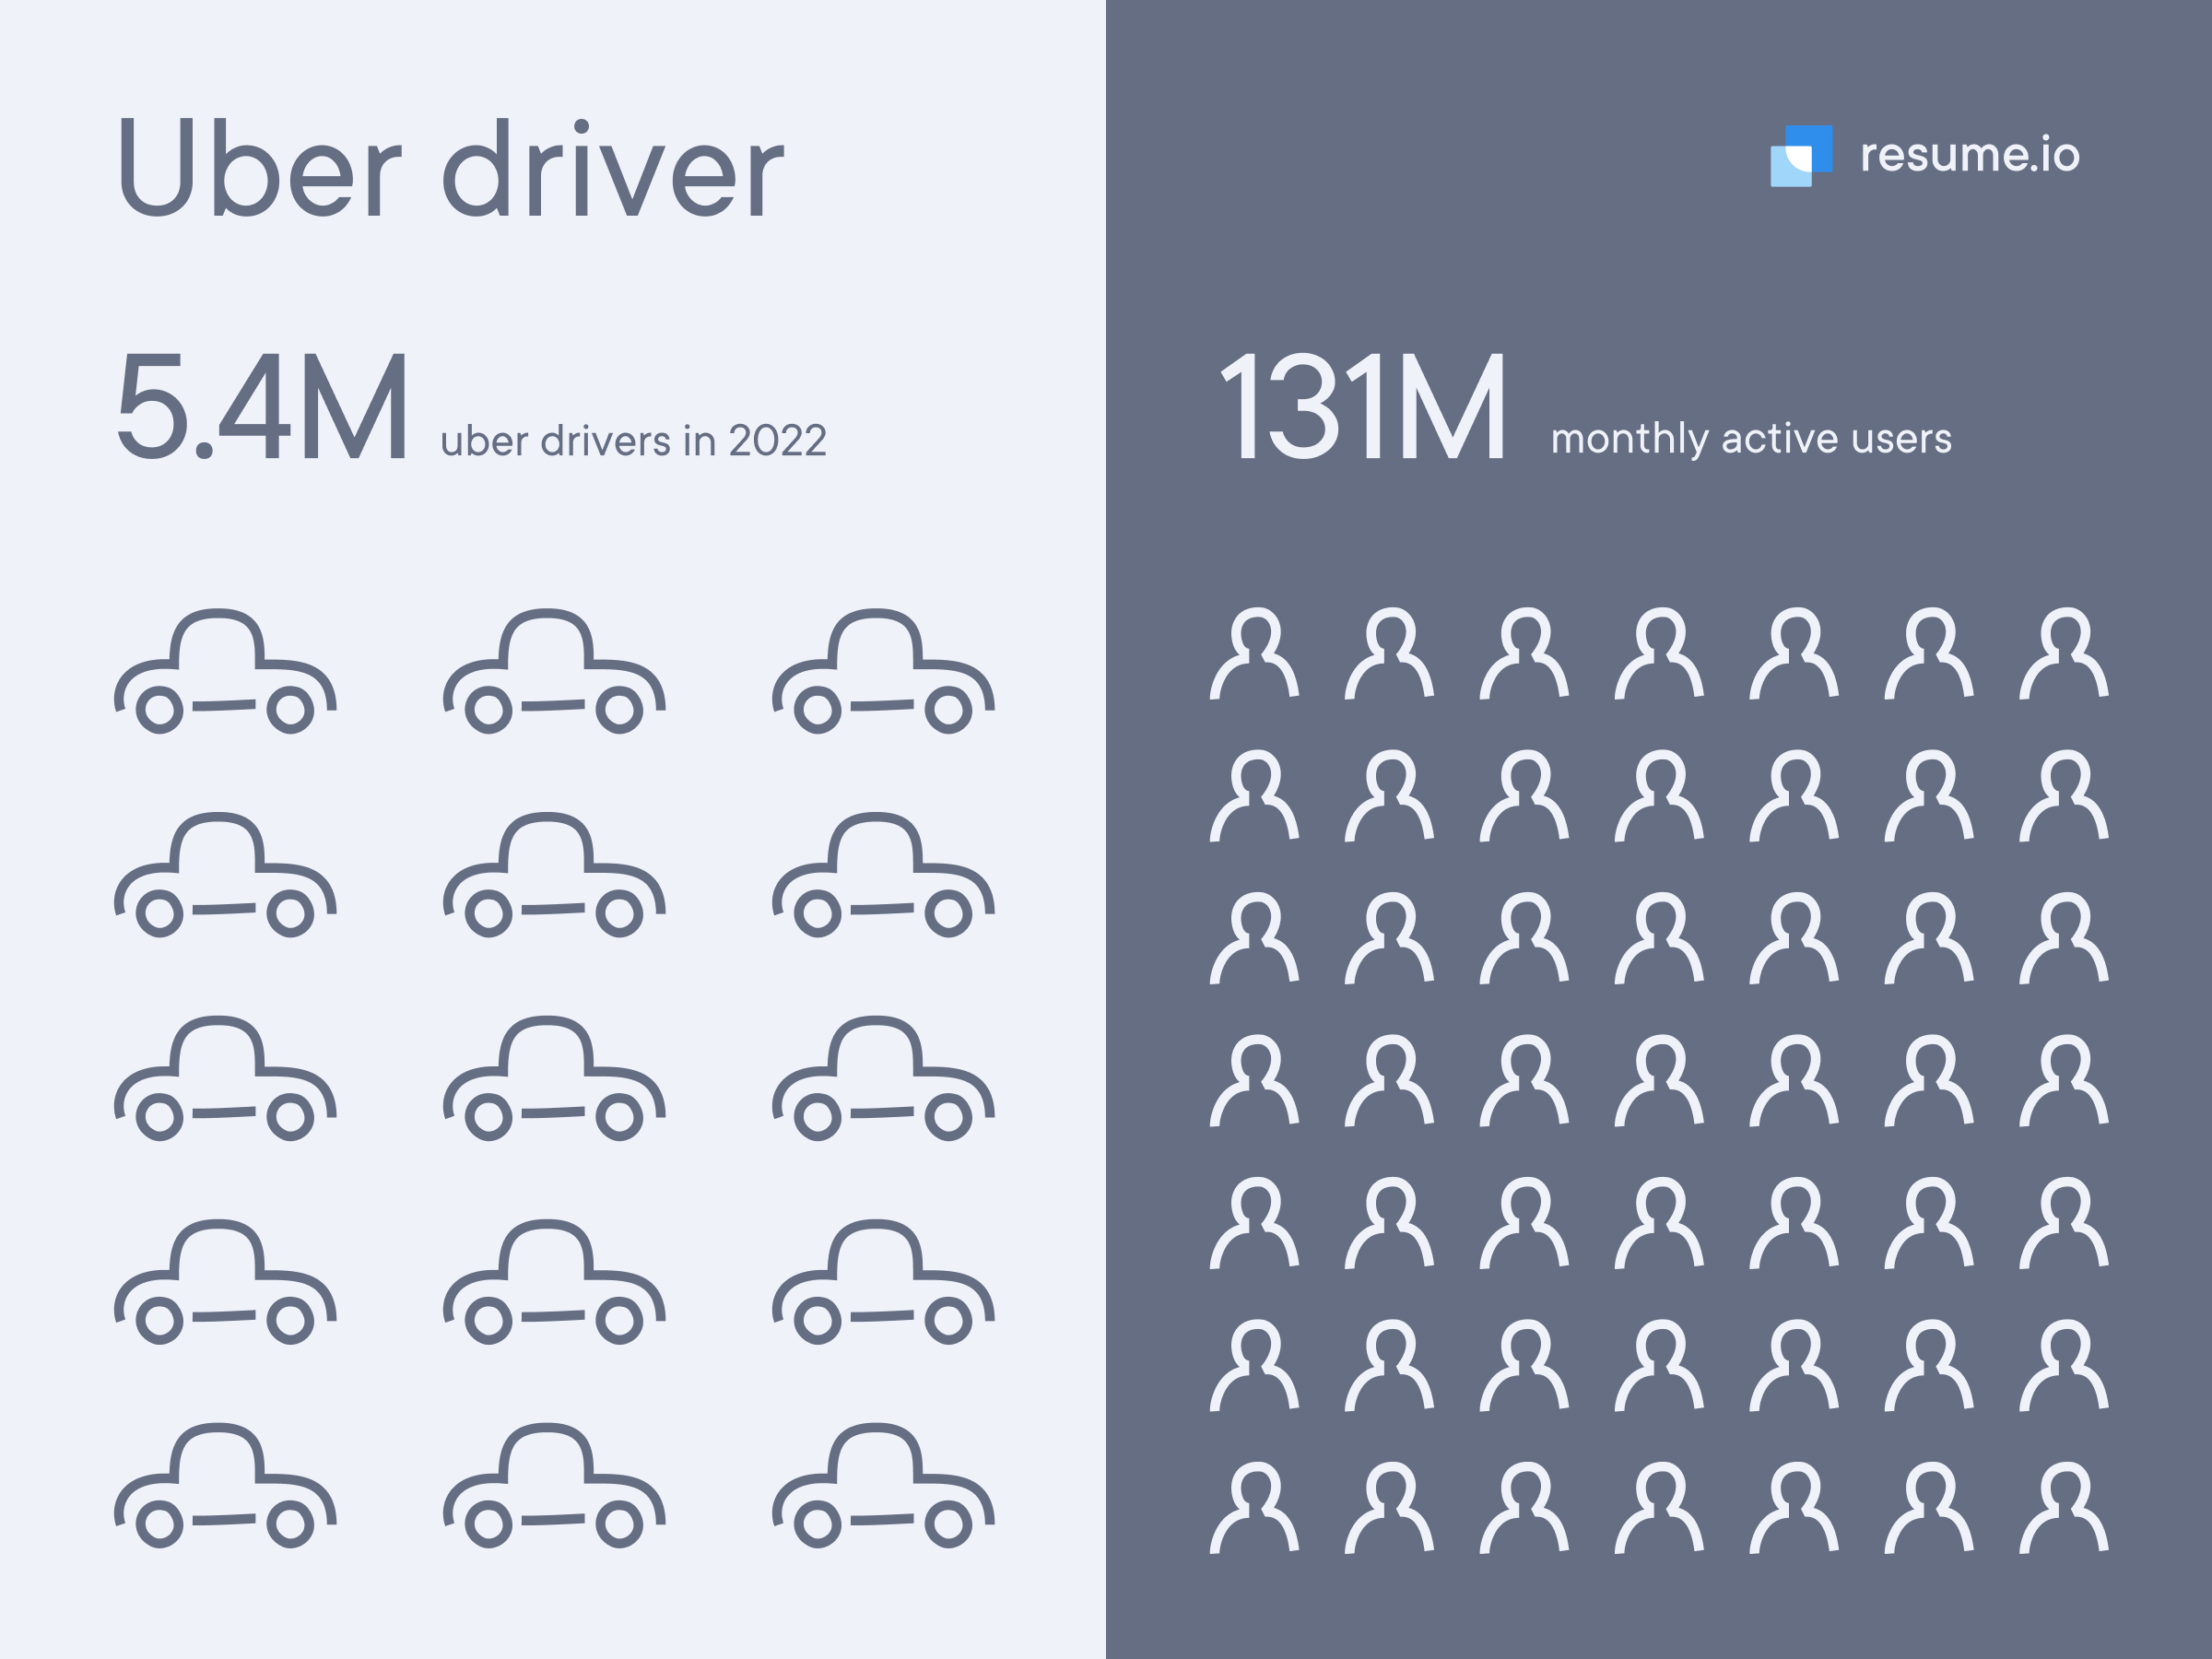 5.4 million Uber drivers in 2022, with 131 million monthly active users